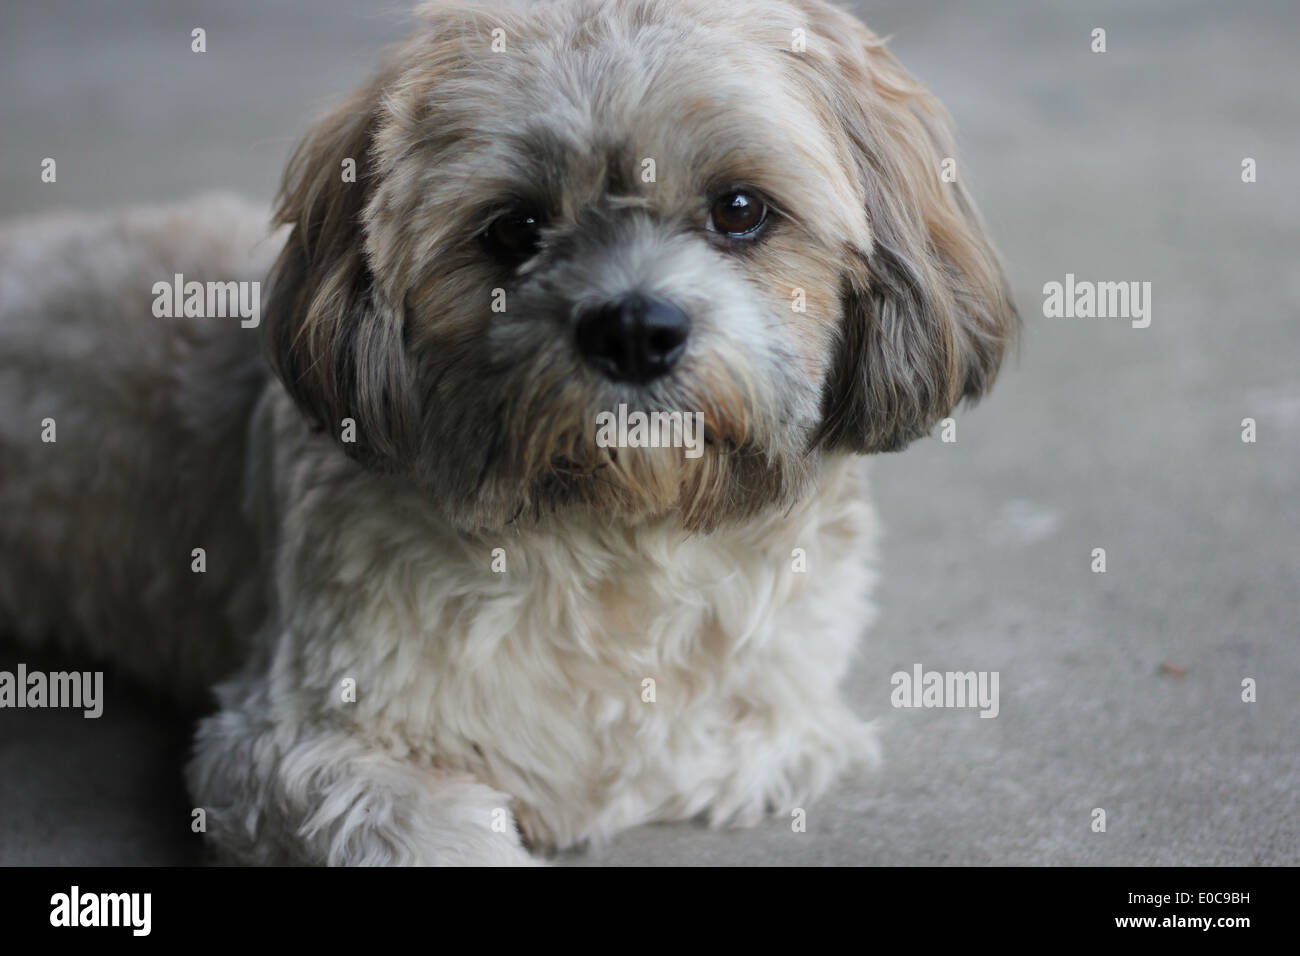 Small dog sitting on the ground. Stock Photo